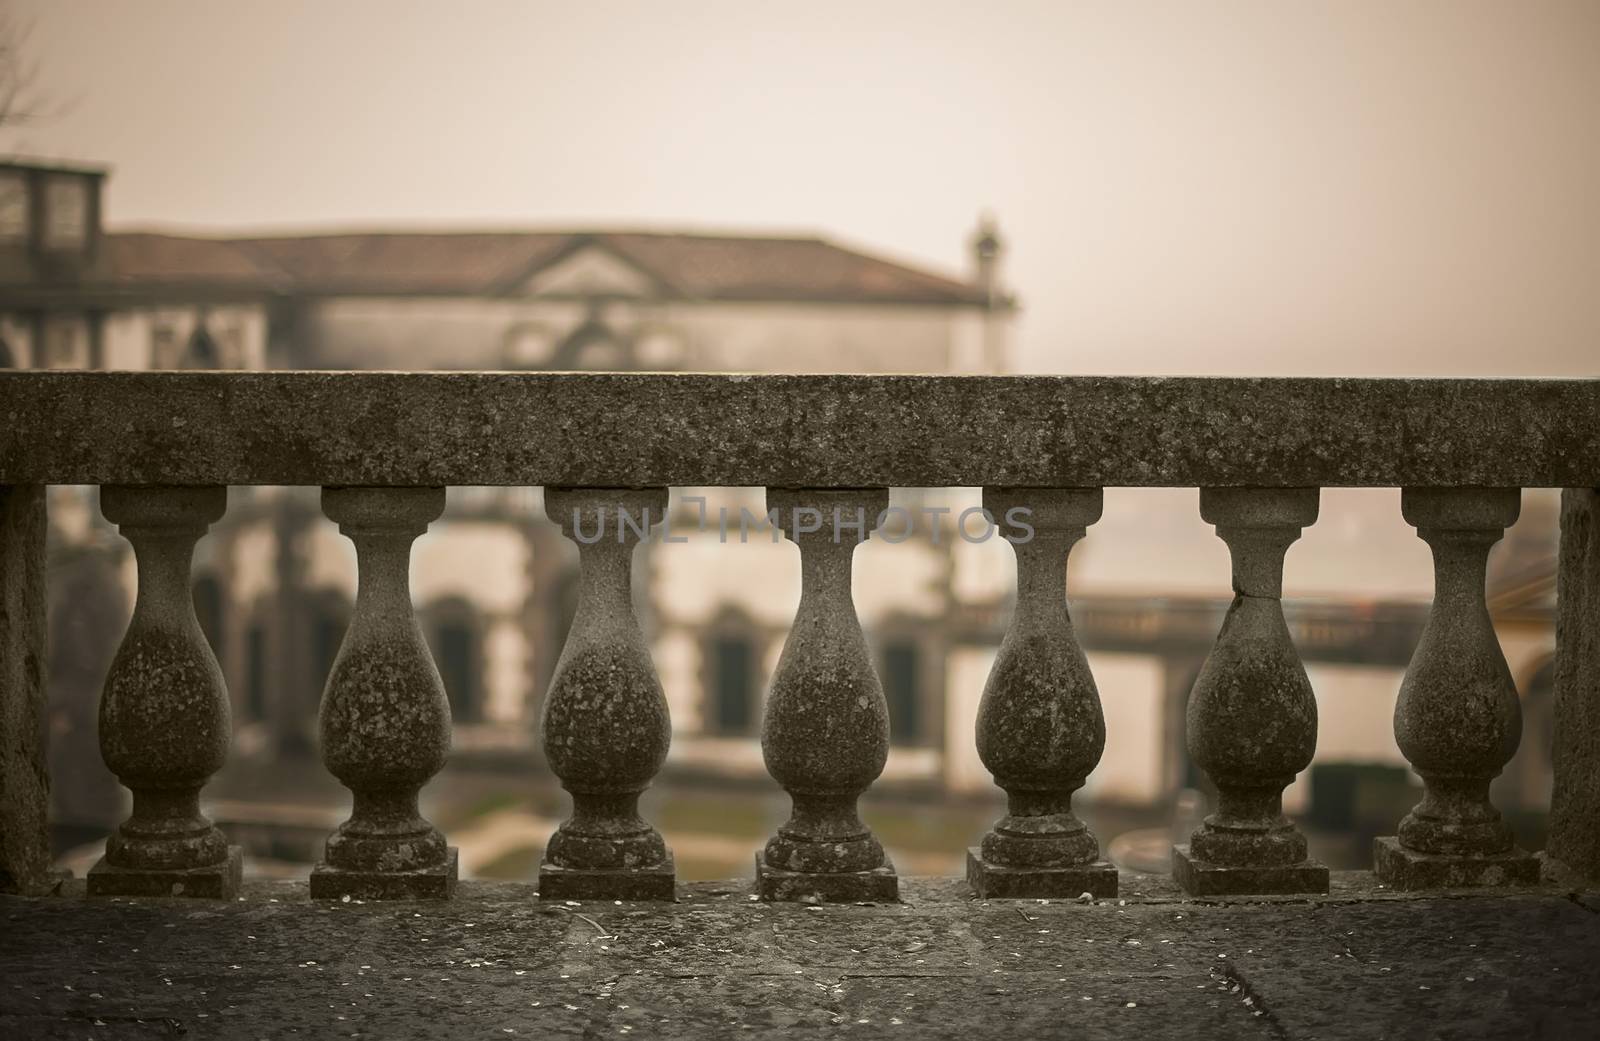 A concrete railing of a typical Italian historic building. A great symbol of the obstacles of life: Every obstacle can be overcome if the fortitude is quite large.